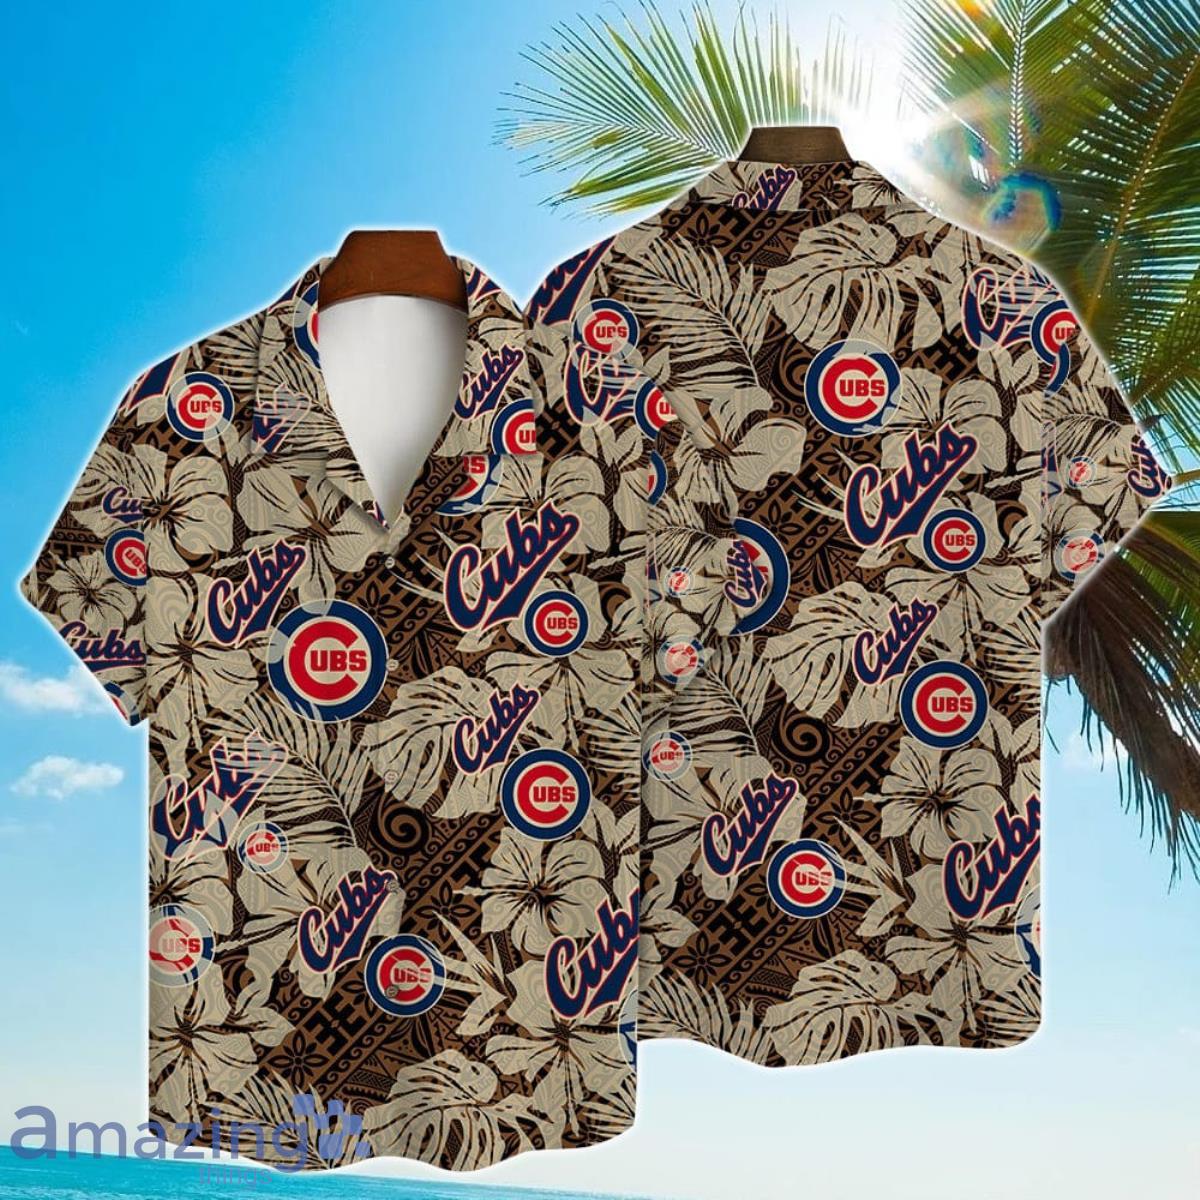 Chicago Cubs Clothing for Sale